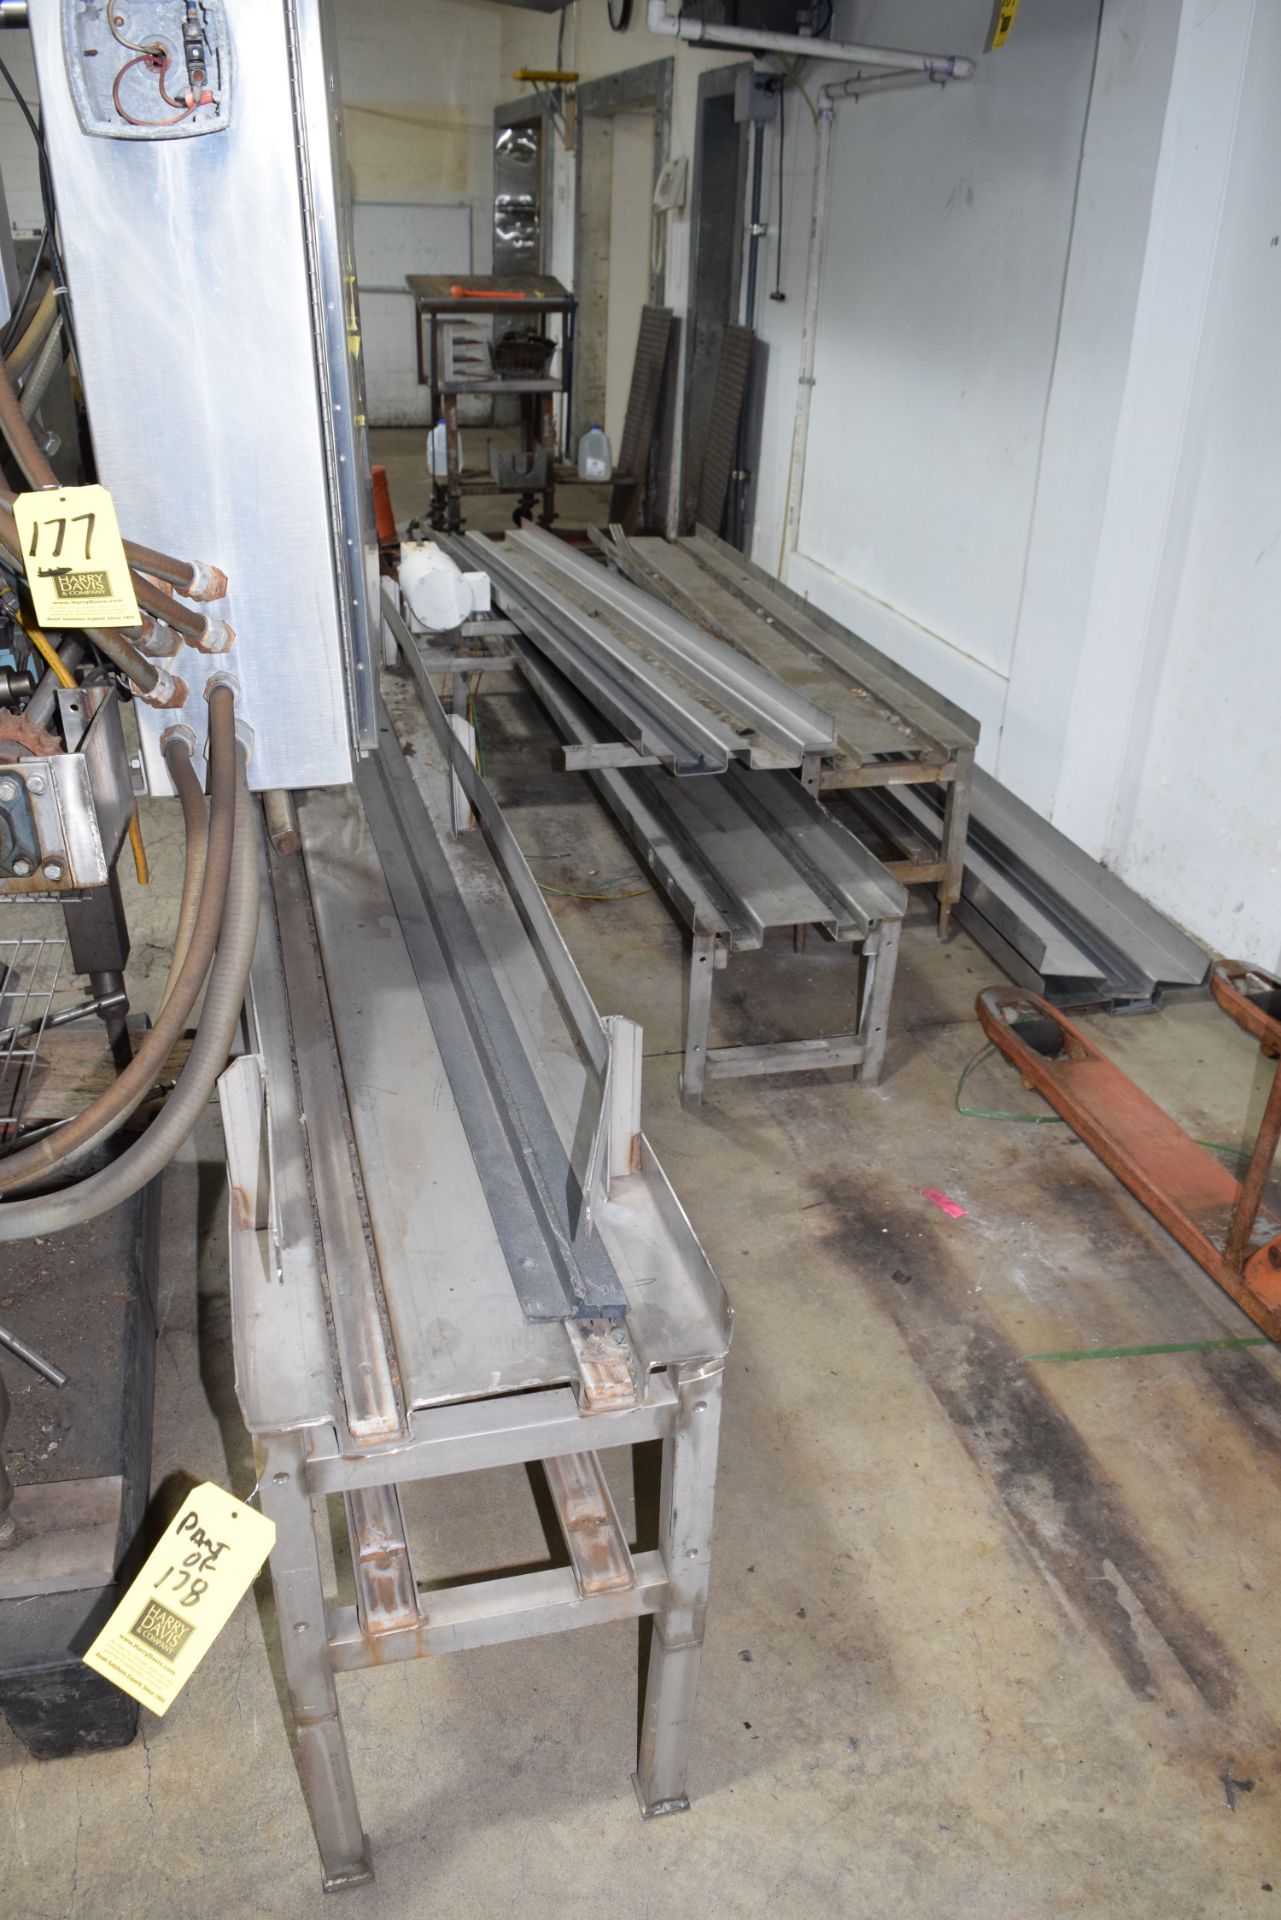 Above Ground S/S Case Conveyor System with 30' (+) Track, 3-Hydraulic Pushers, Diverter Units, - Image 2 of 3